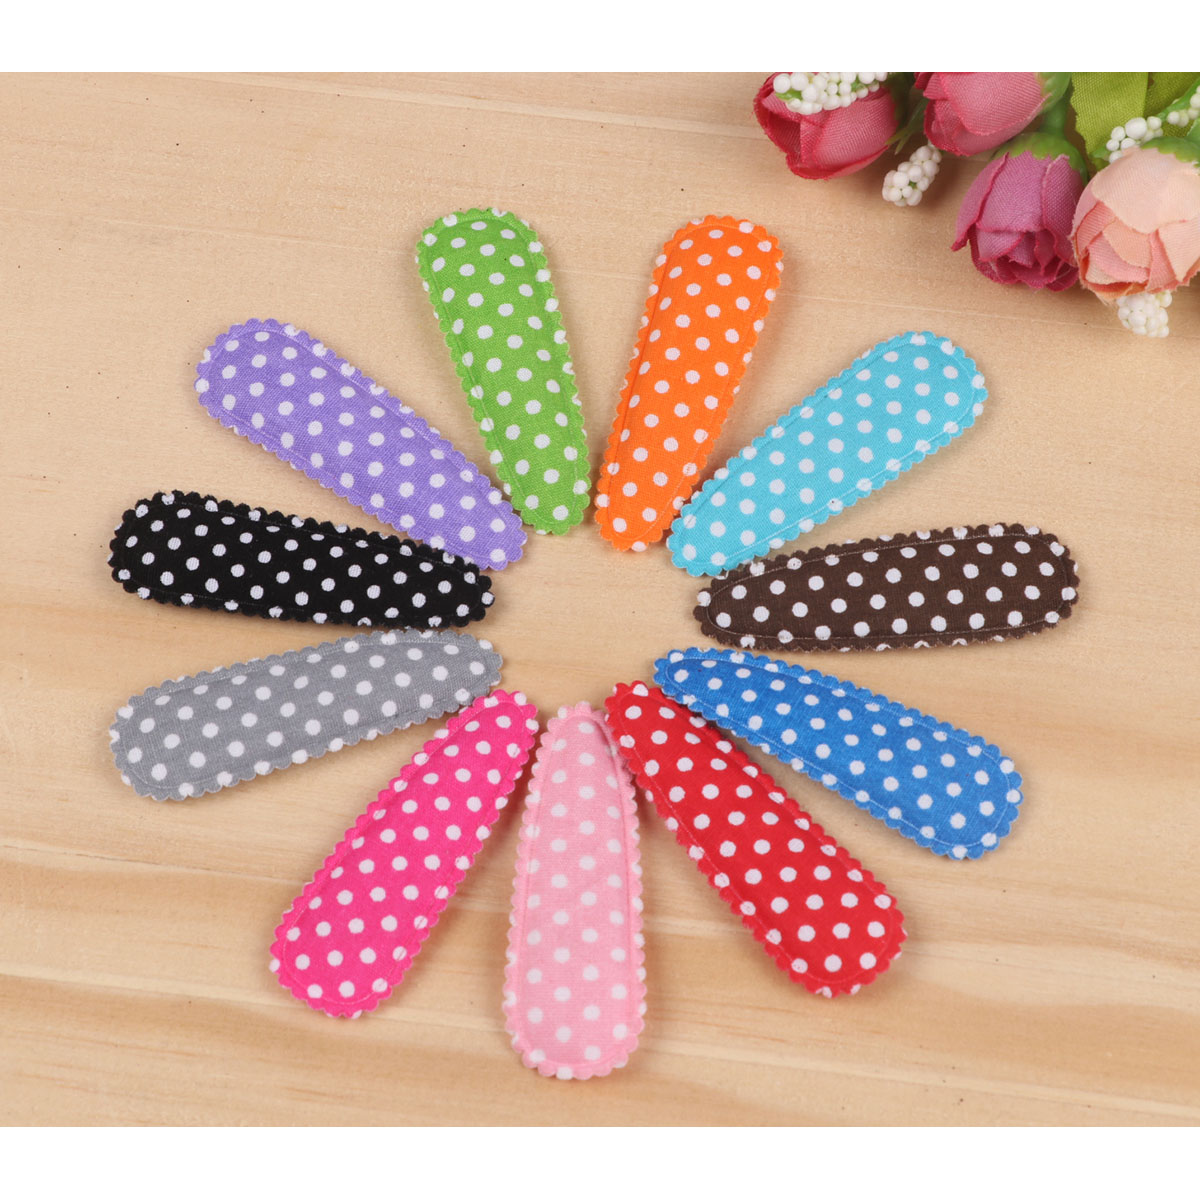 55 Padded Hair Clip Covers Dots 55mm-11 Colors